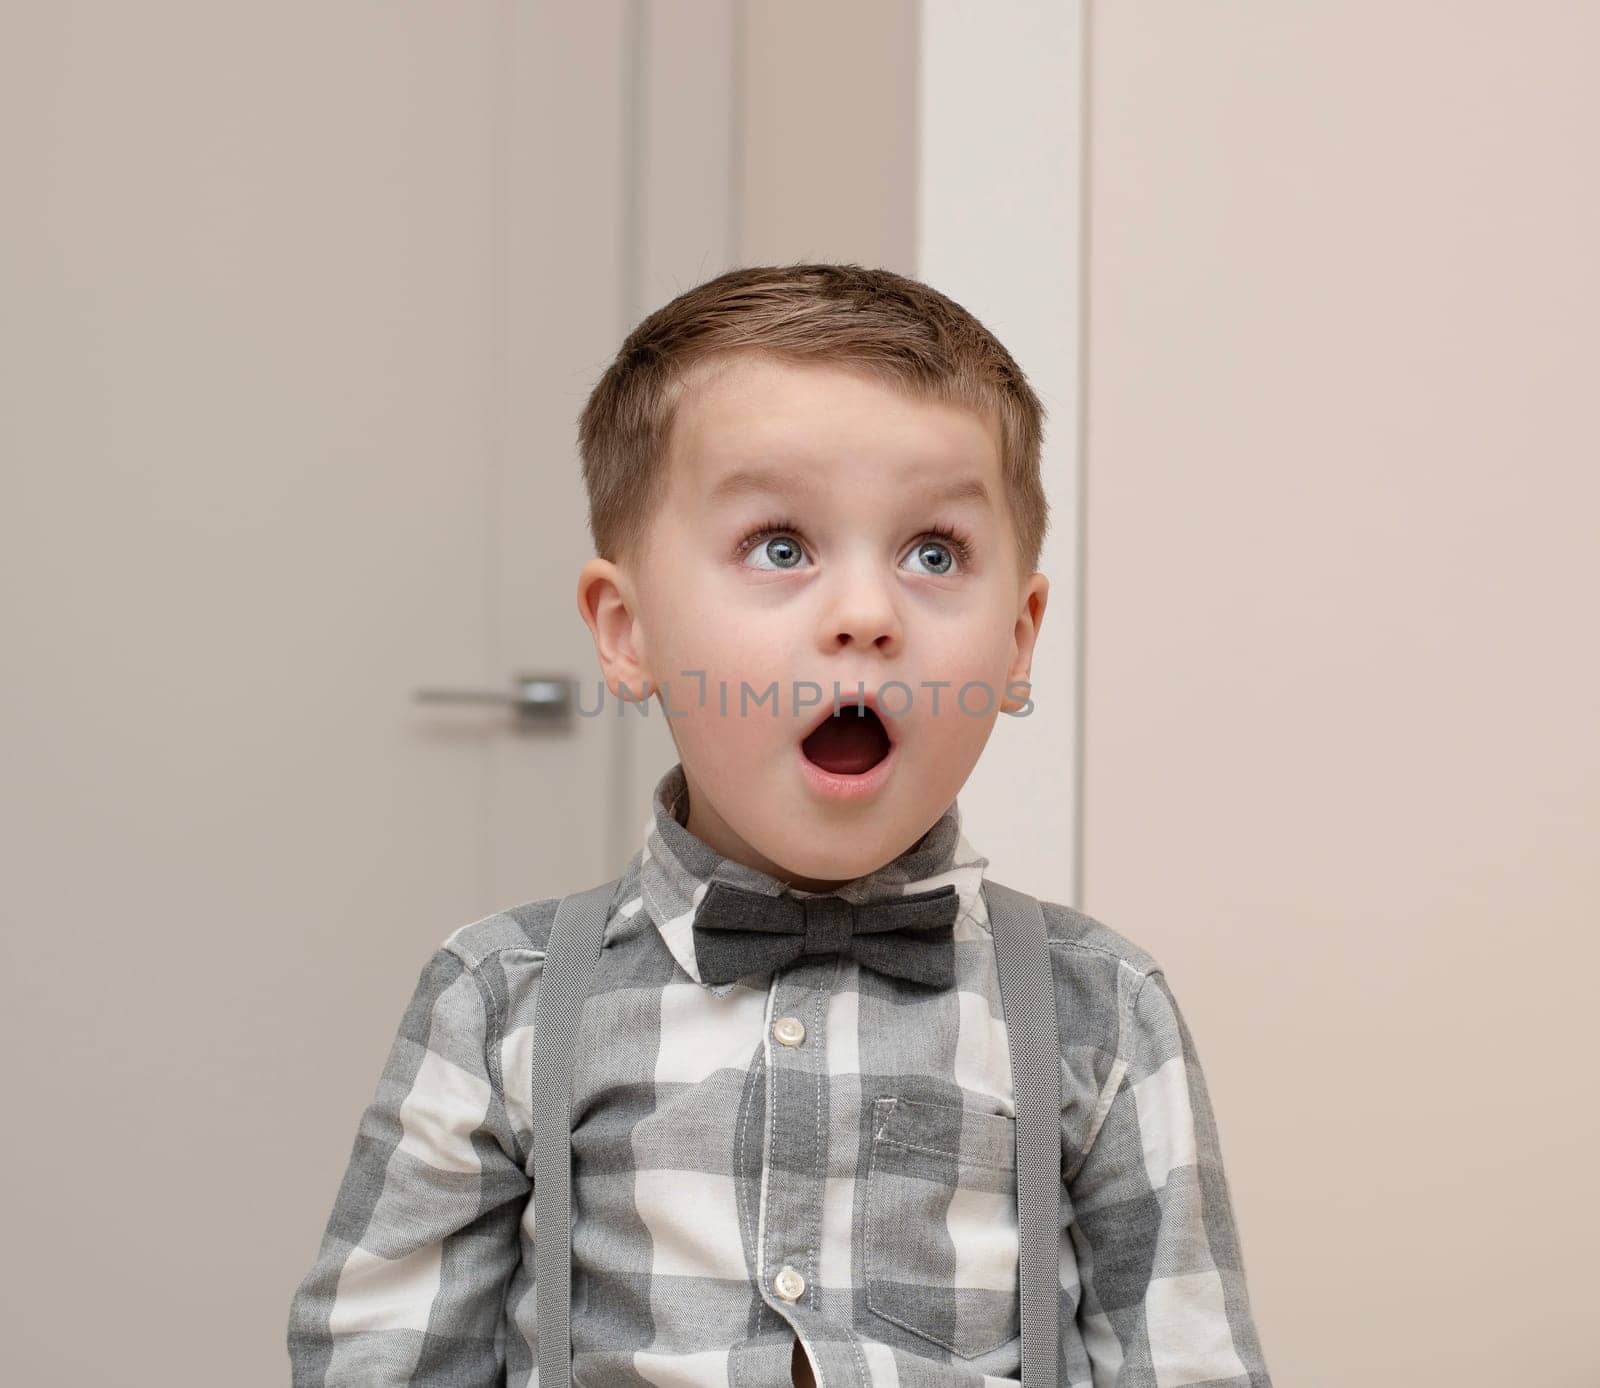 Emotions of surprise and delight on the child s face. A small handsome boy of 4 years old in a shirt with a bow tie shows a grimace with an expression on his face. Close-up. by ketlit